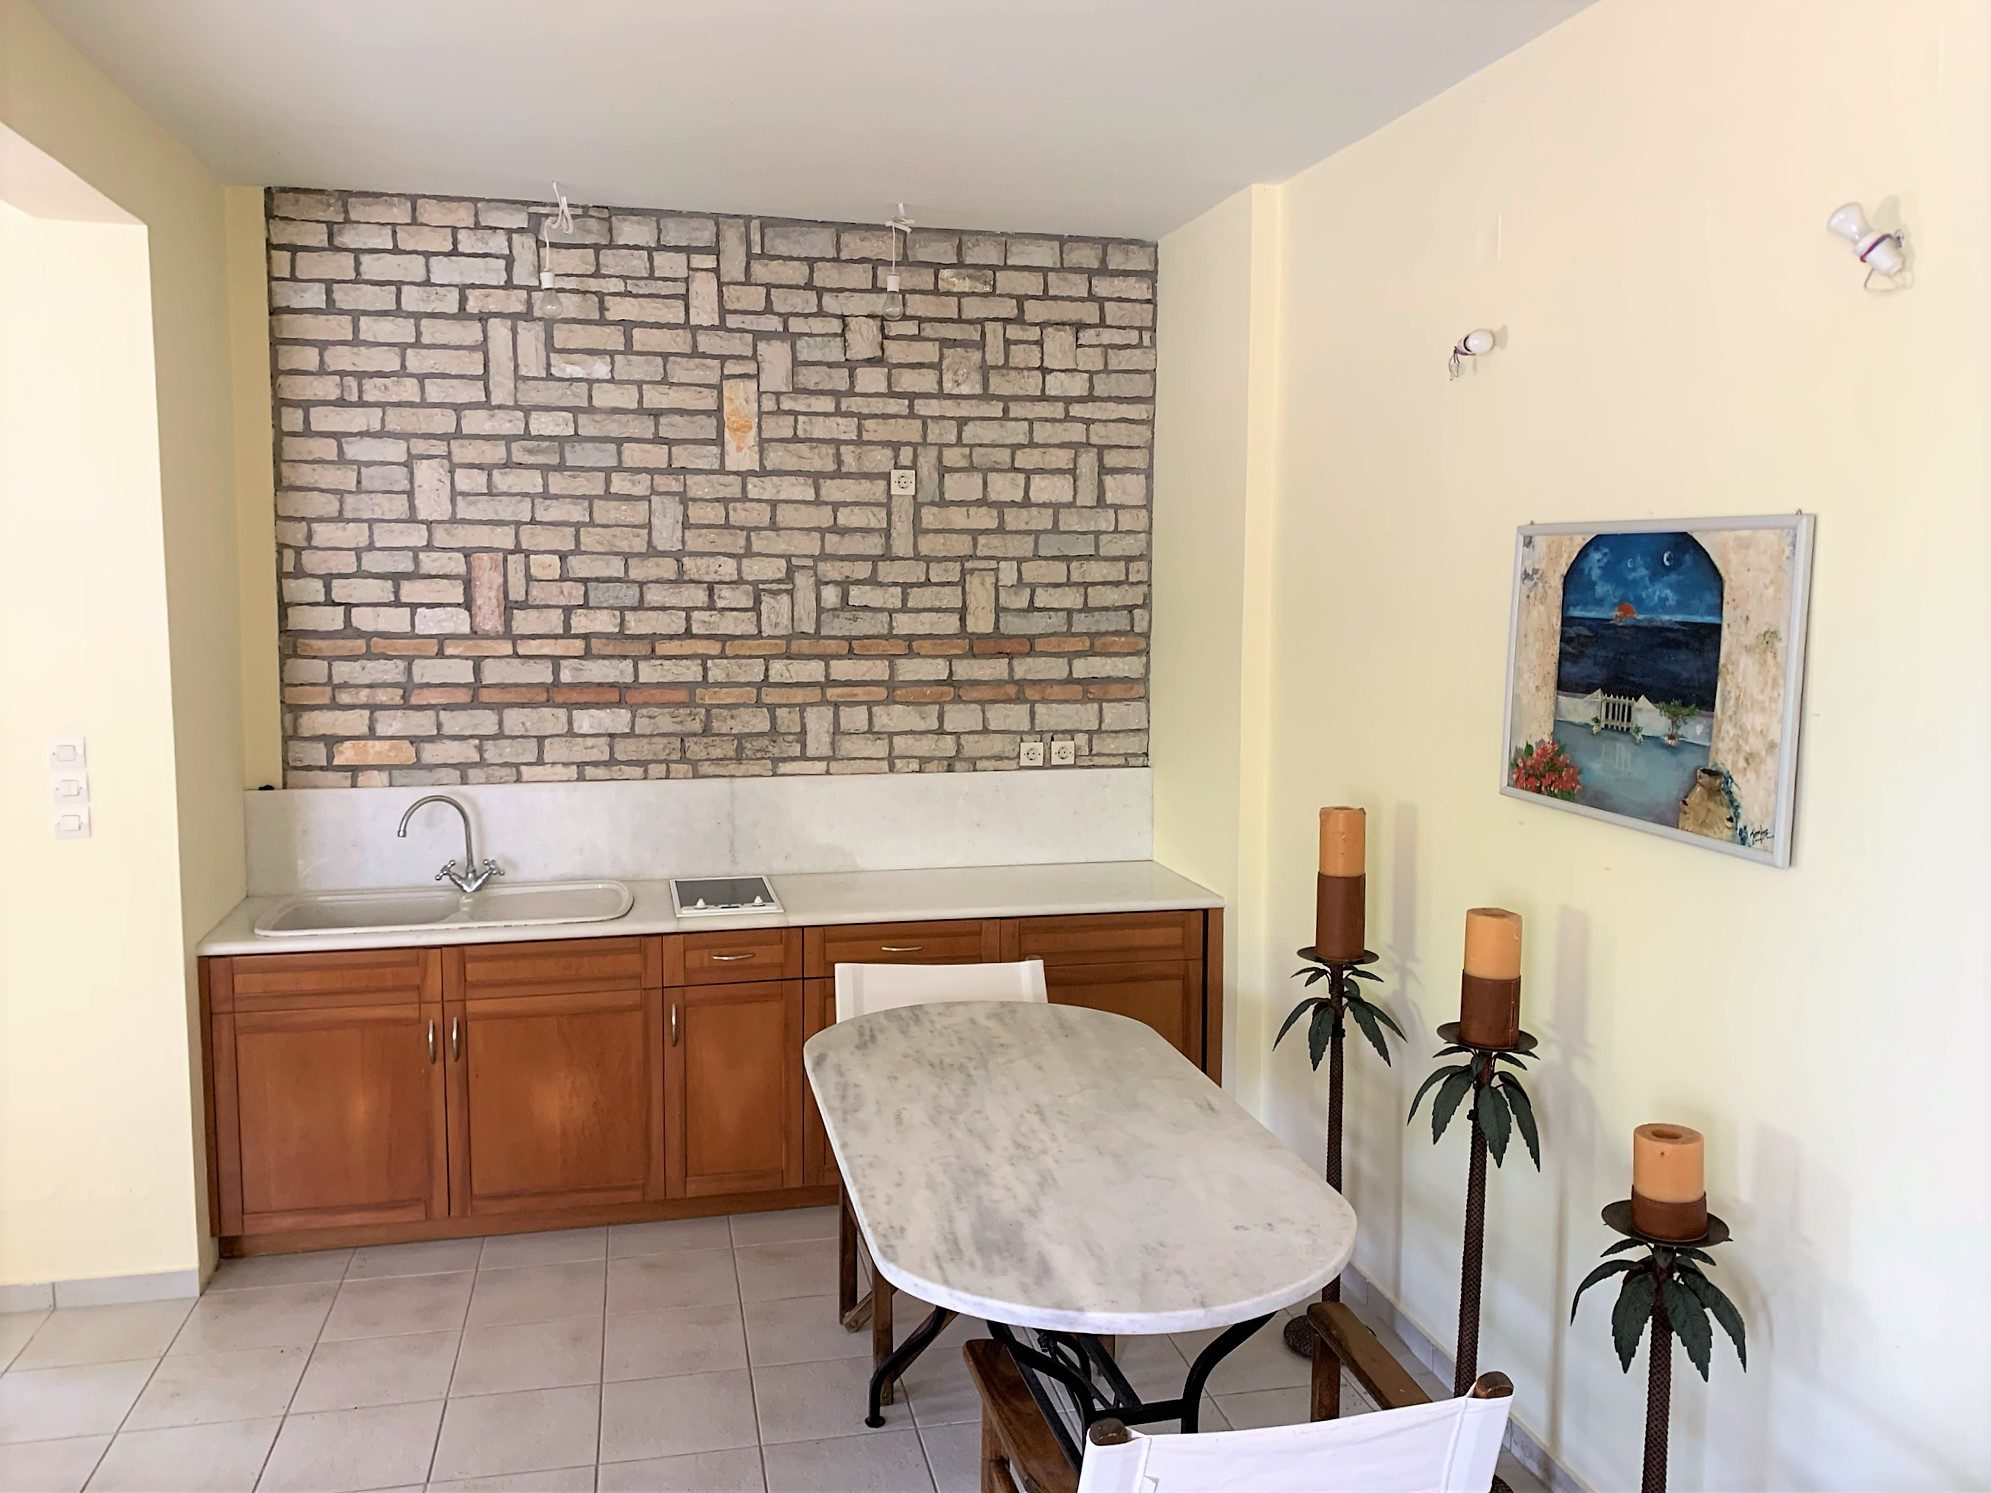 Kitchen area of studio below of house for sale Ithaca Greece, Aetos